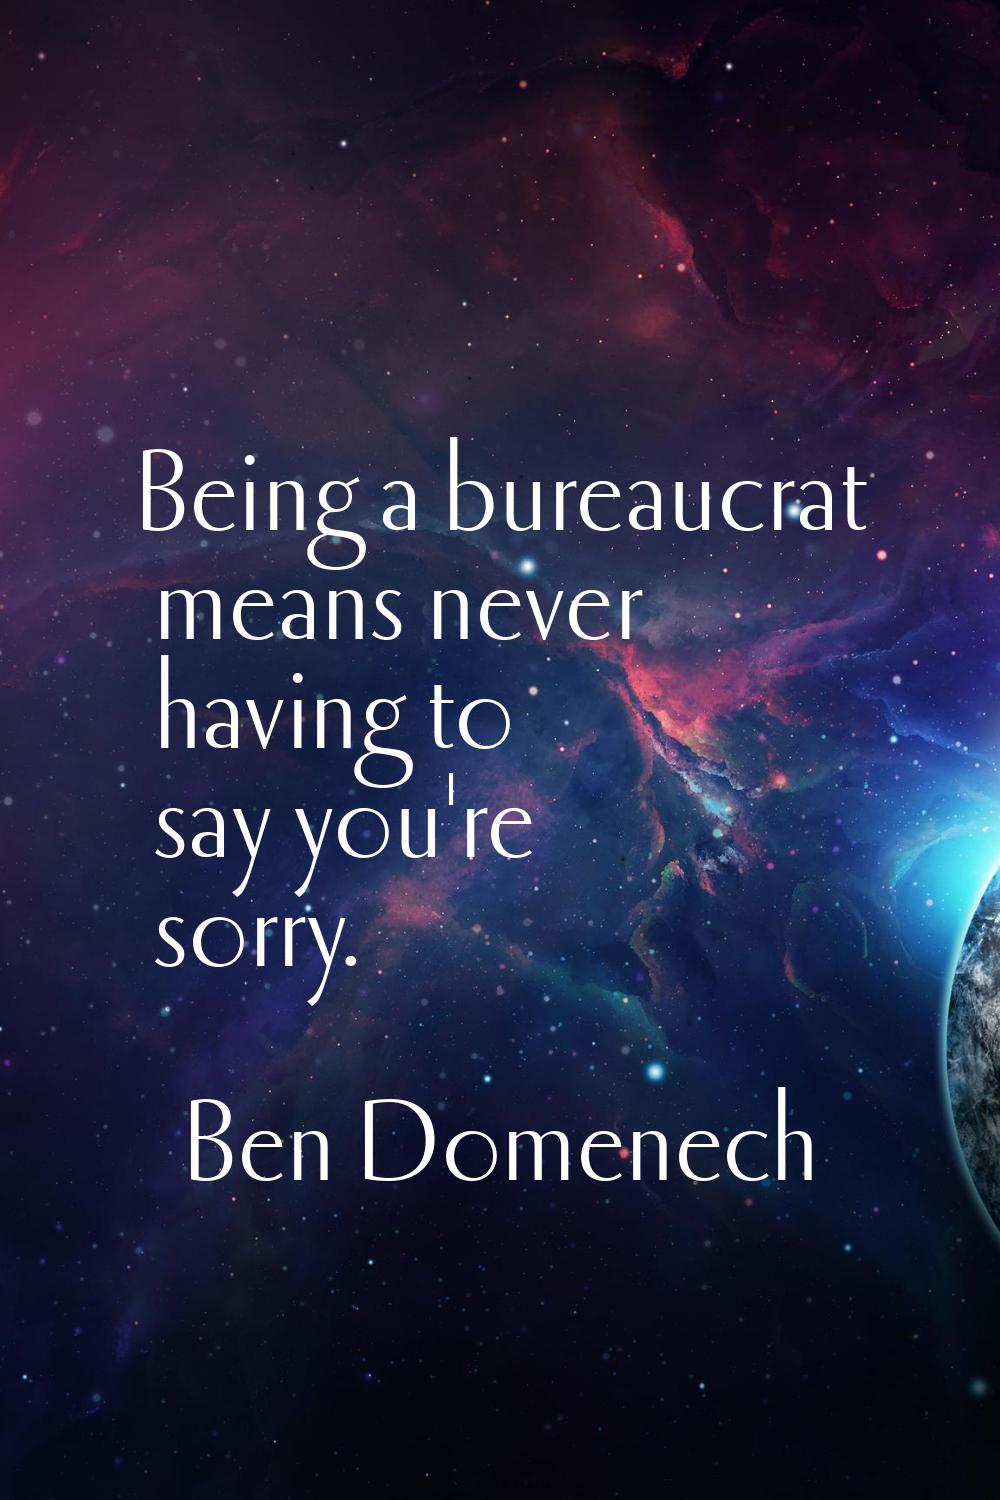 Being a bureaucrat means never having to say you're sorry.